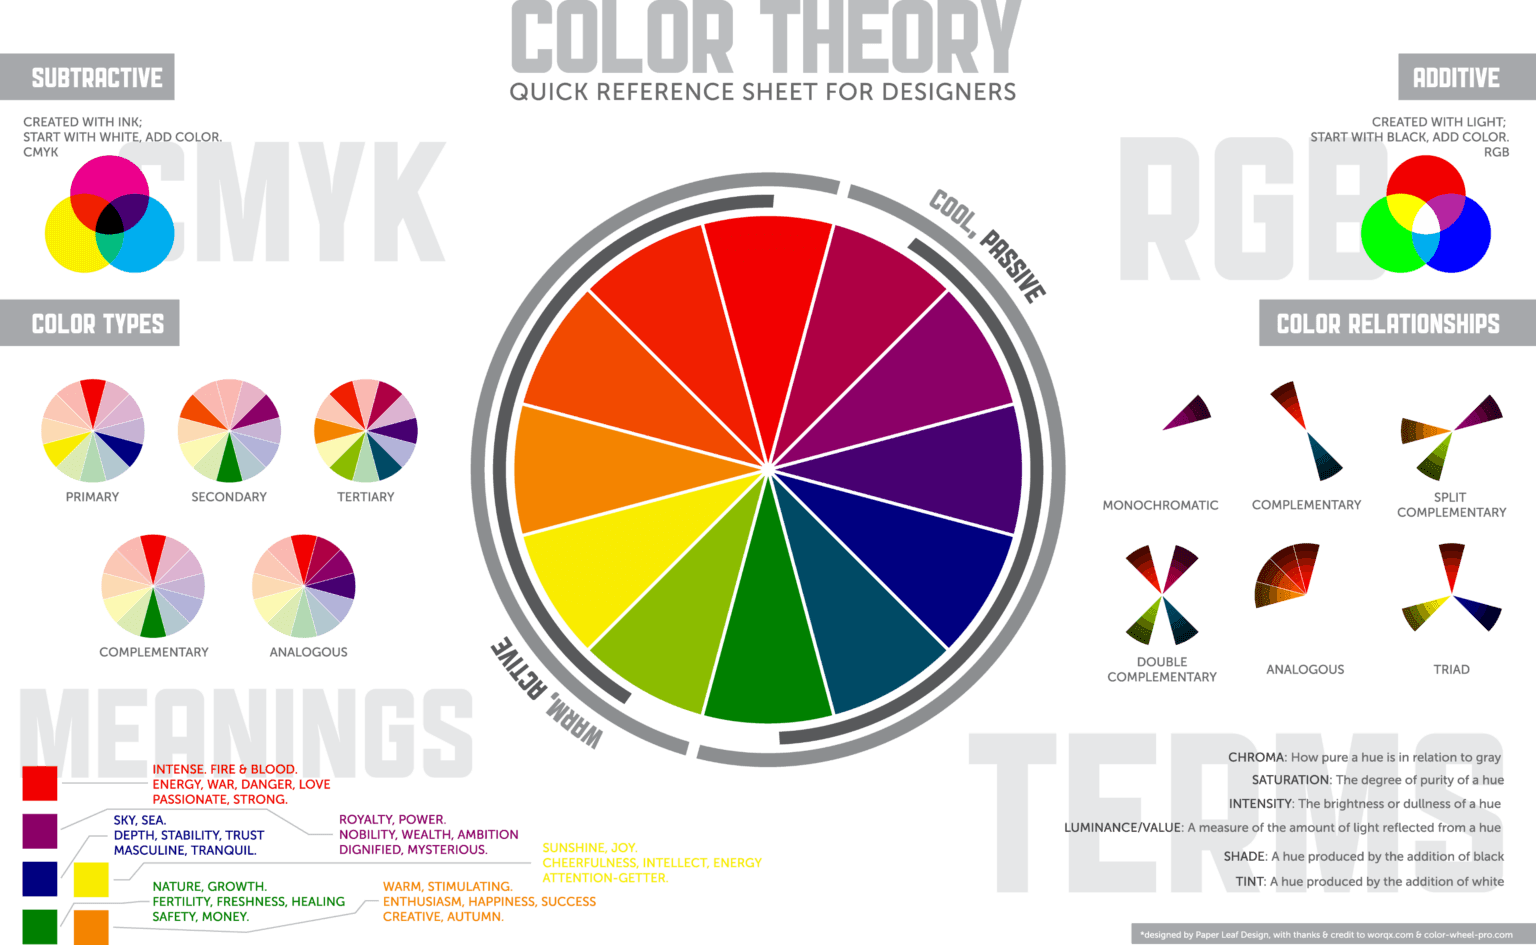 rainbow colors in order red to purple